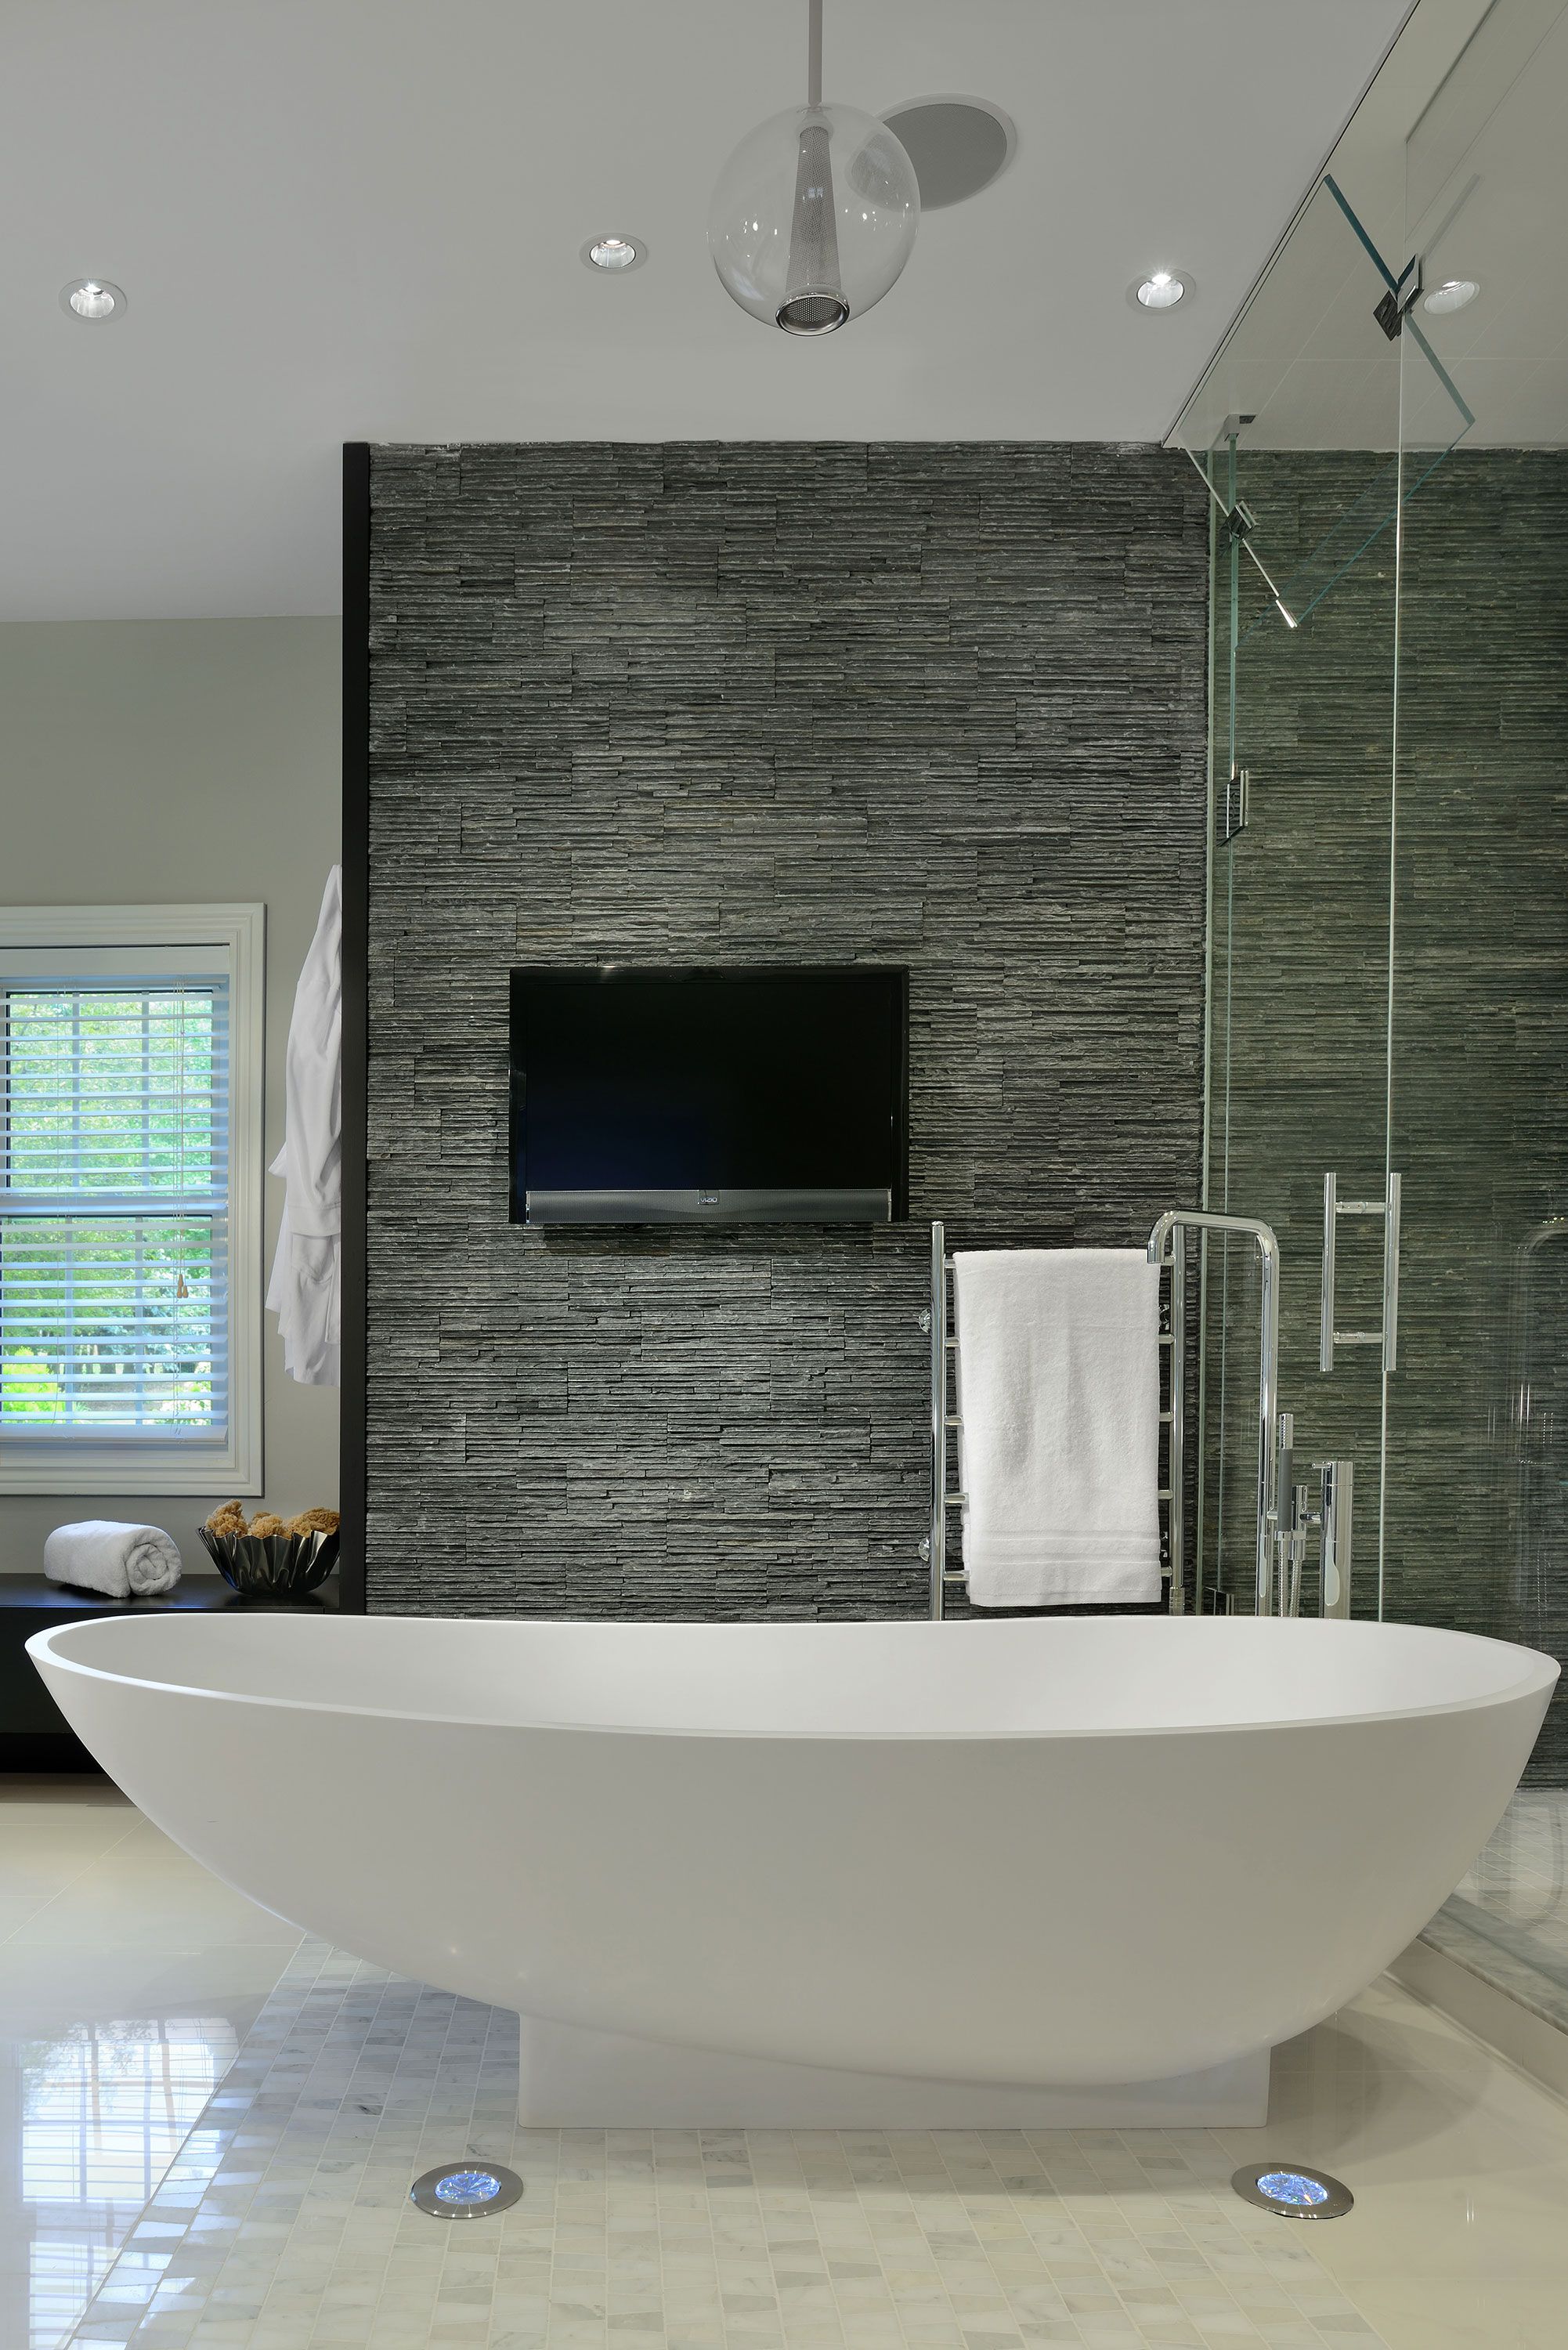 50 Best Freestanding Tubs Pictures Of Stylish Freestanding Soaking Bathtubs